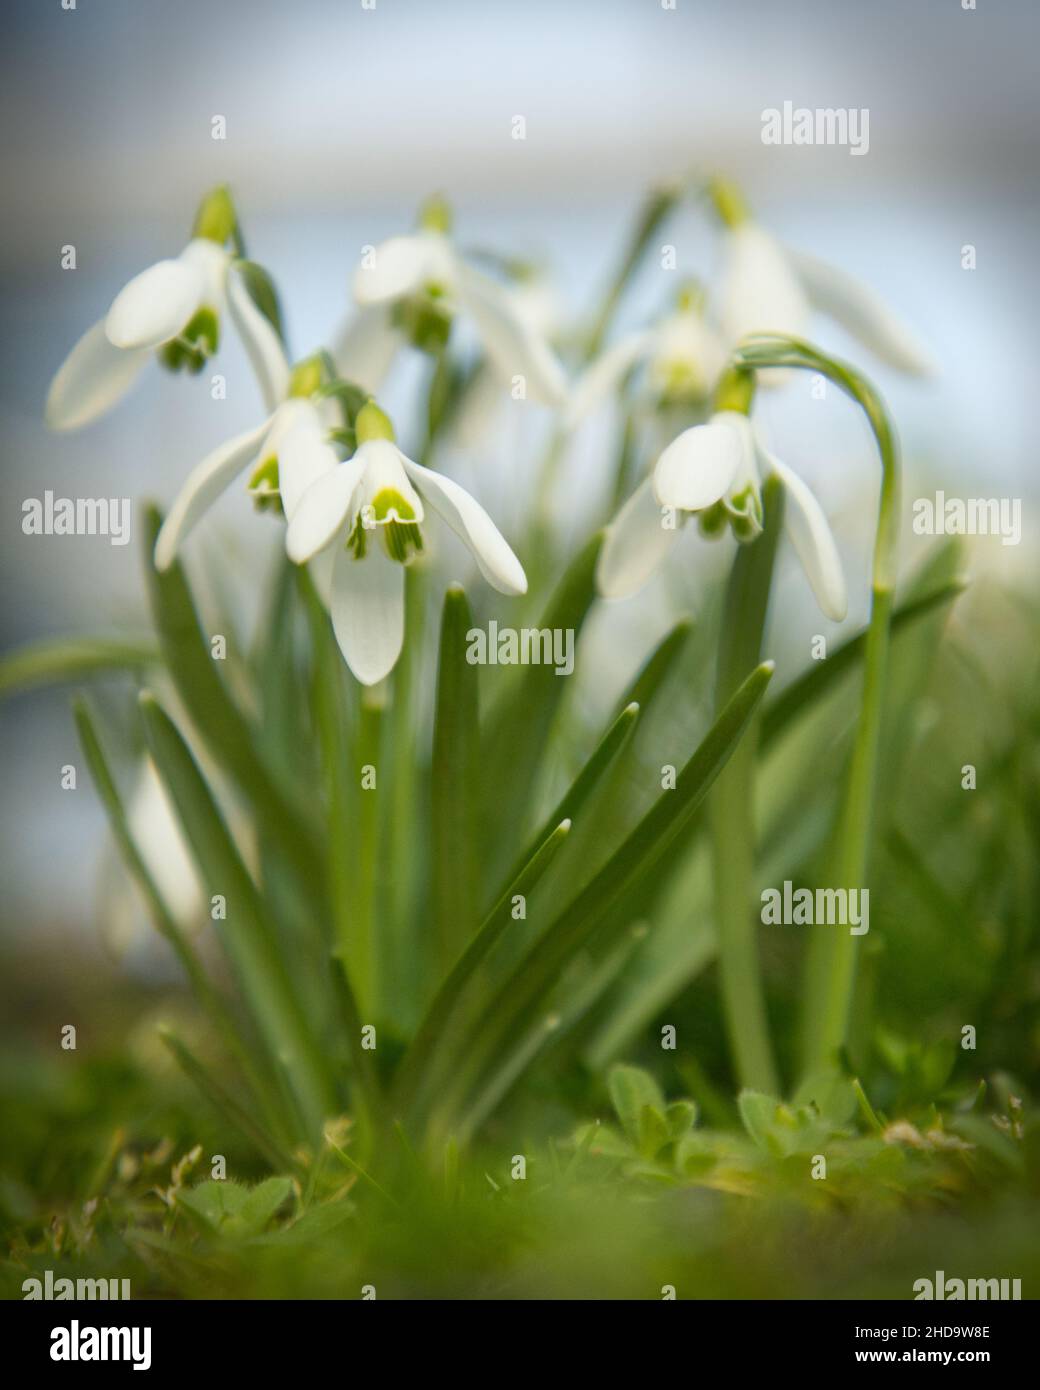 Selective focus of white snowdrop flowers blooming in a field against a blurred background Stock Photo